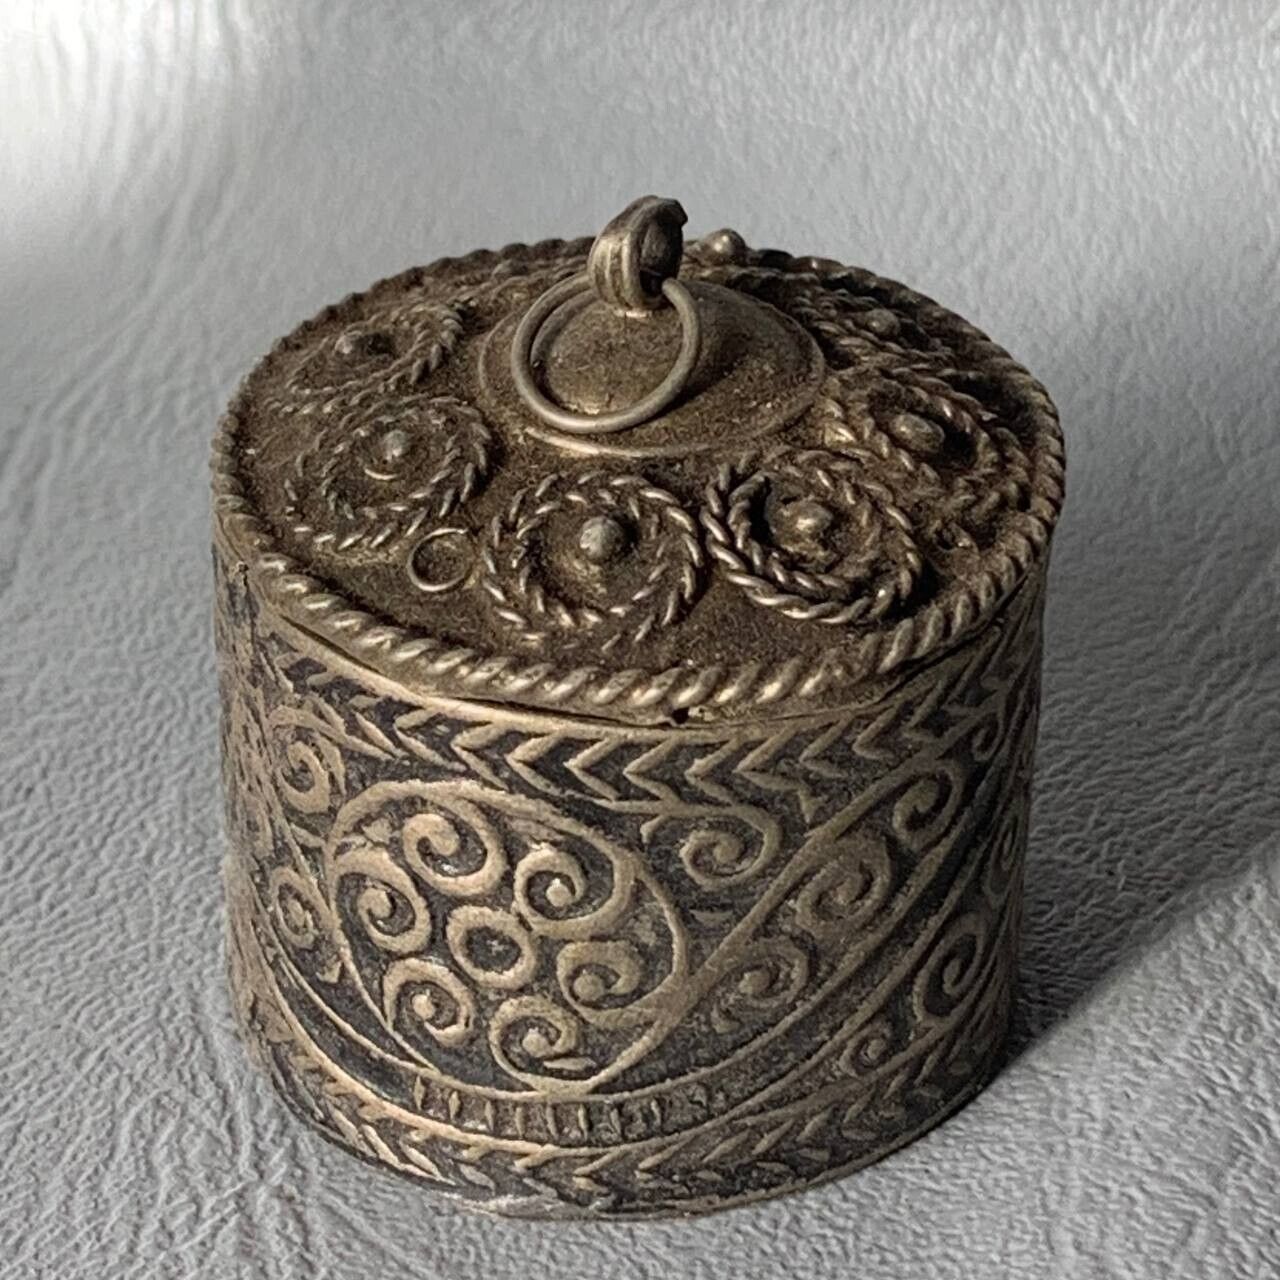 Box Jewelry Viking Rare Very Stunning Ancient Old Bronze Small Star Engraving